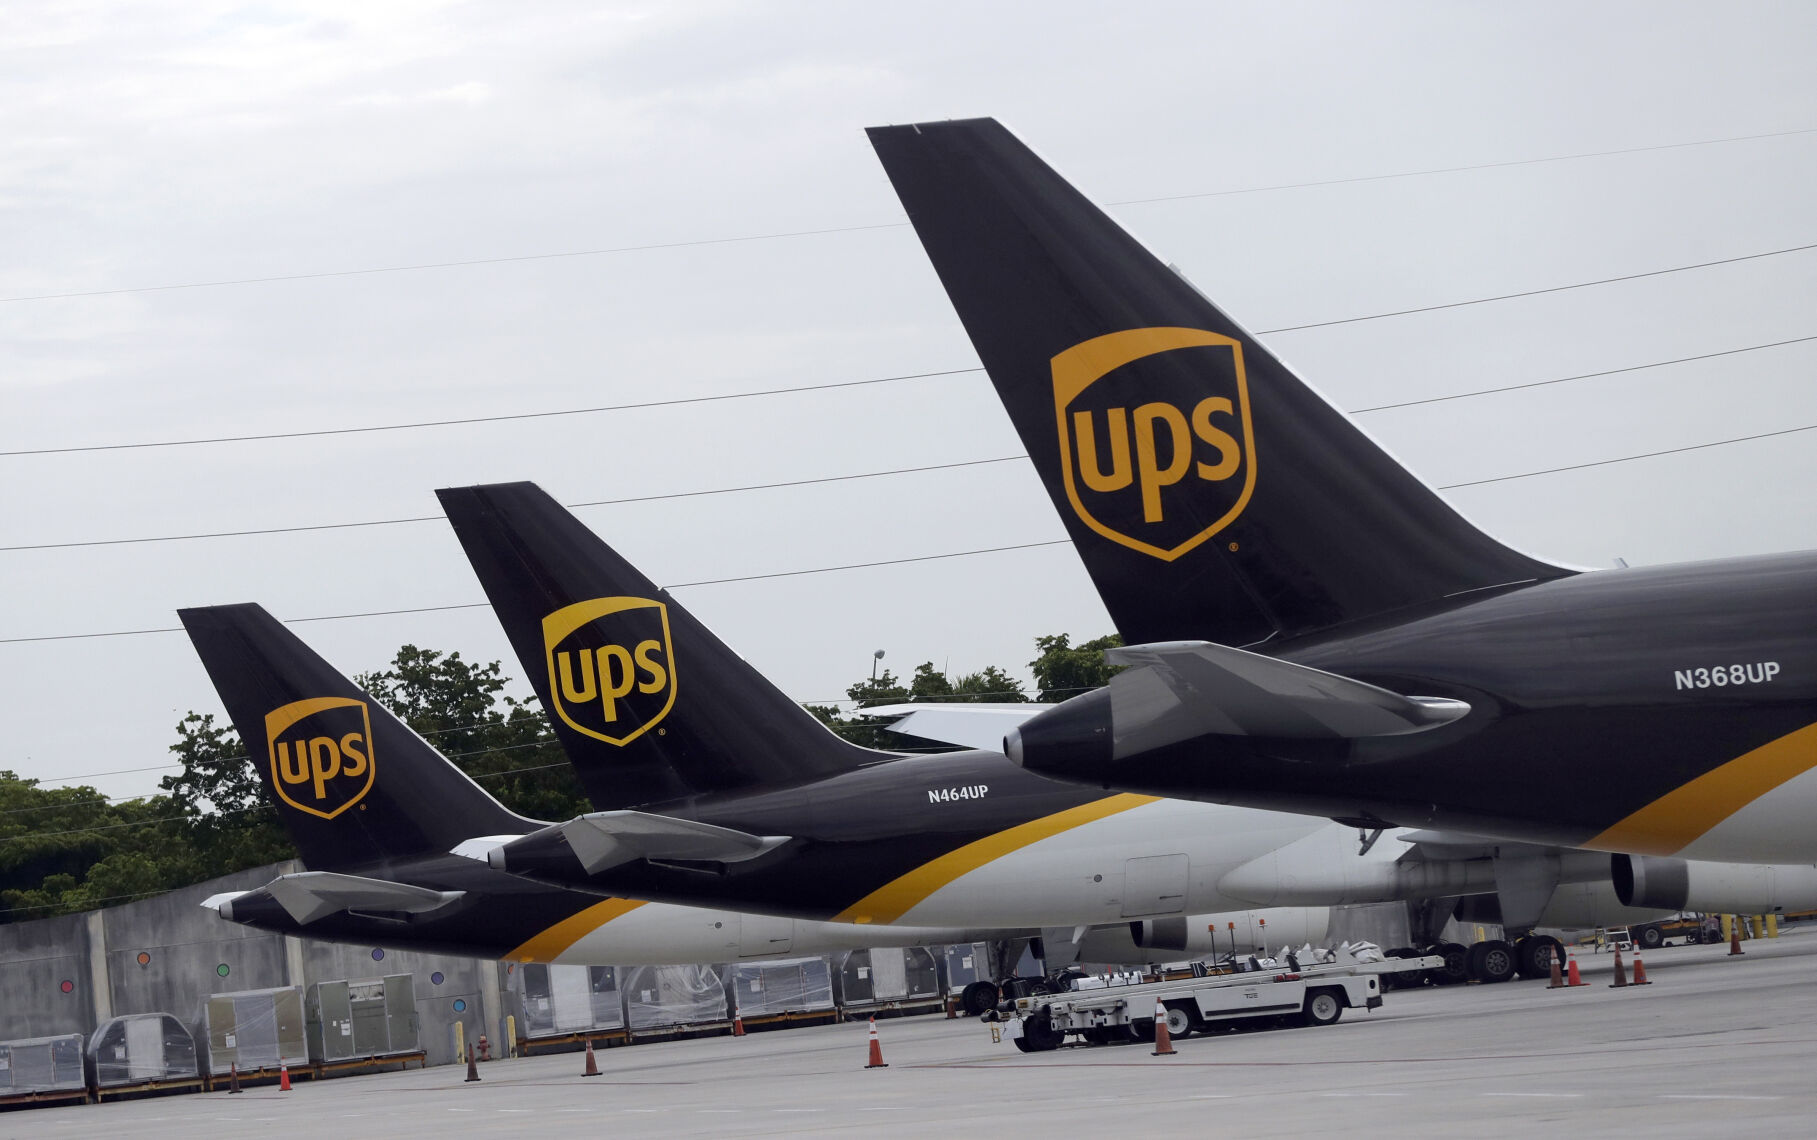 <p>FILE - In this July 27, 2020 file photo, the tails of three UPS aircraft are shown parked at Miami International Airport in Miami. Carriers like the U.S. Postal Service, FedEx and United Parcel Service have capacity to meet projected demand this holiday season, which is cheery news for shippers and shoppers alike. (AP Photo/Wilfredo Lee, File)</p>   PHOTO CREDIT: Wilfredo Lee - staff, ASSOCIATED PRESS